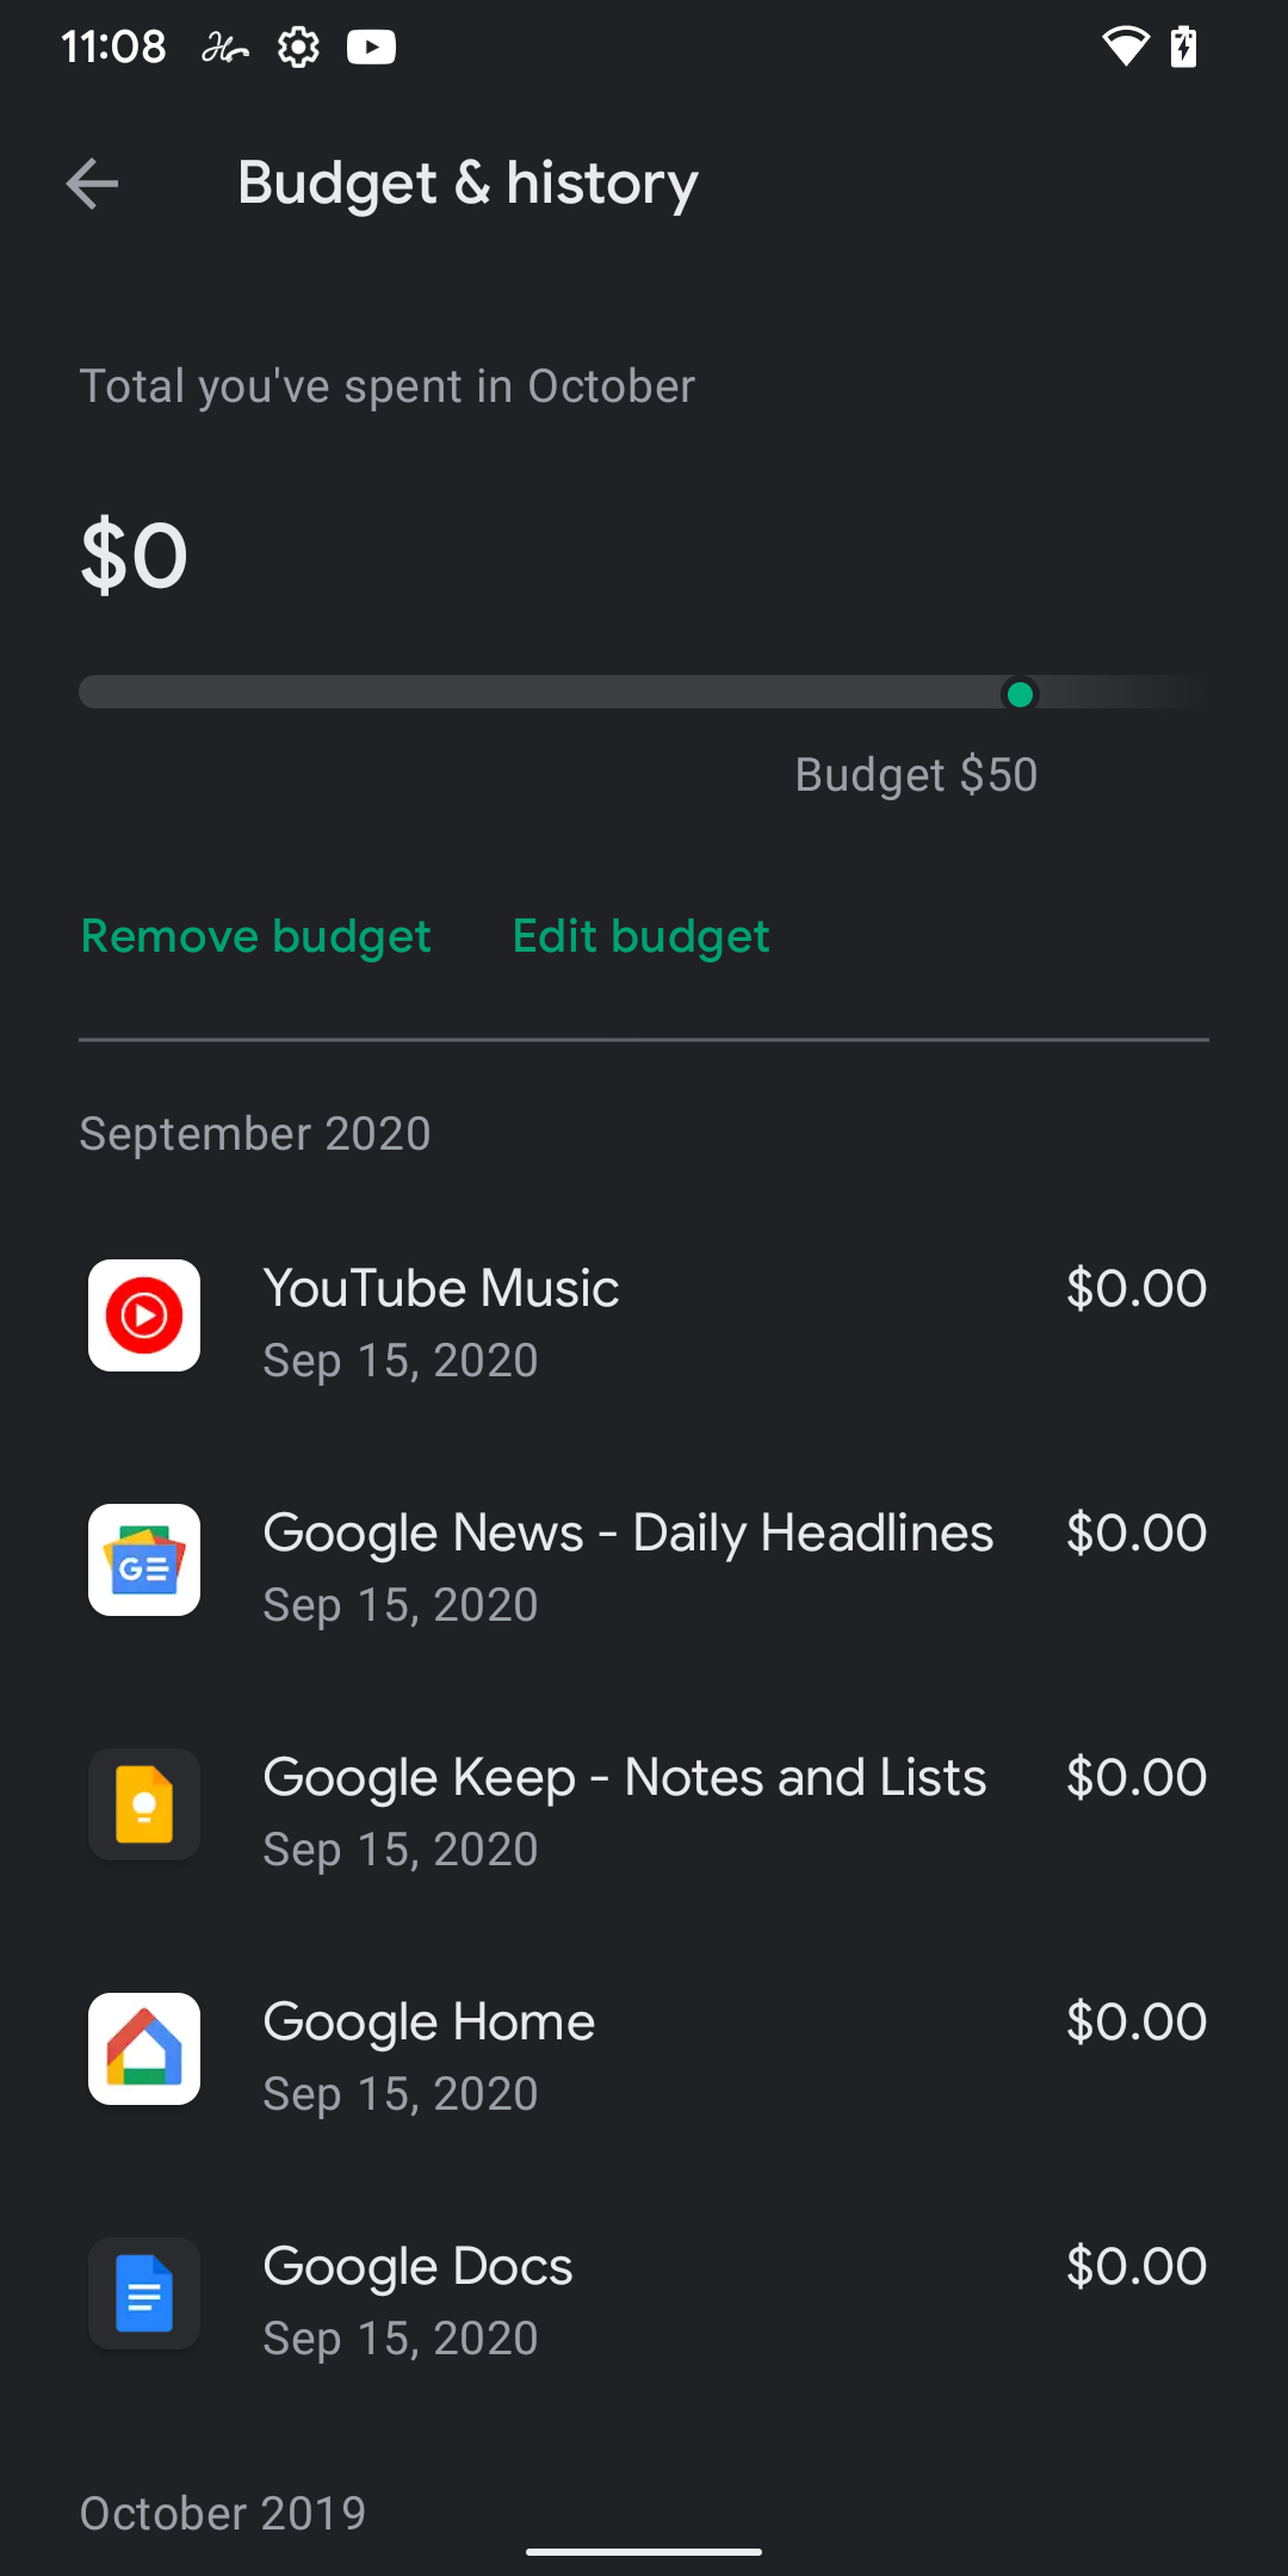 You can remove or edit the budget anytime.